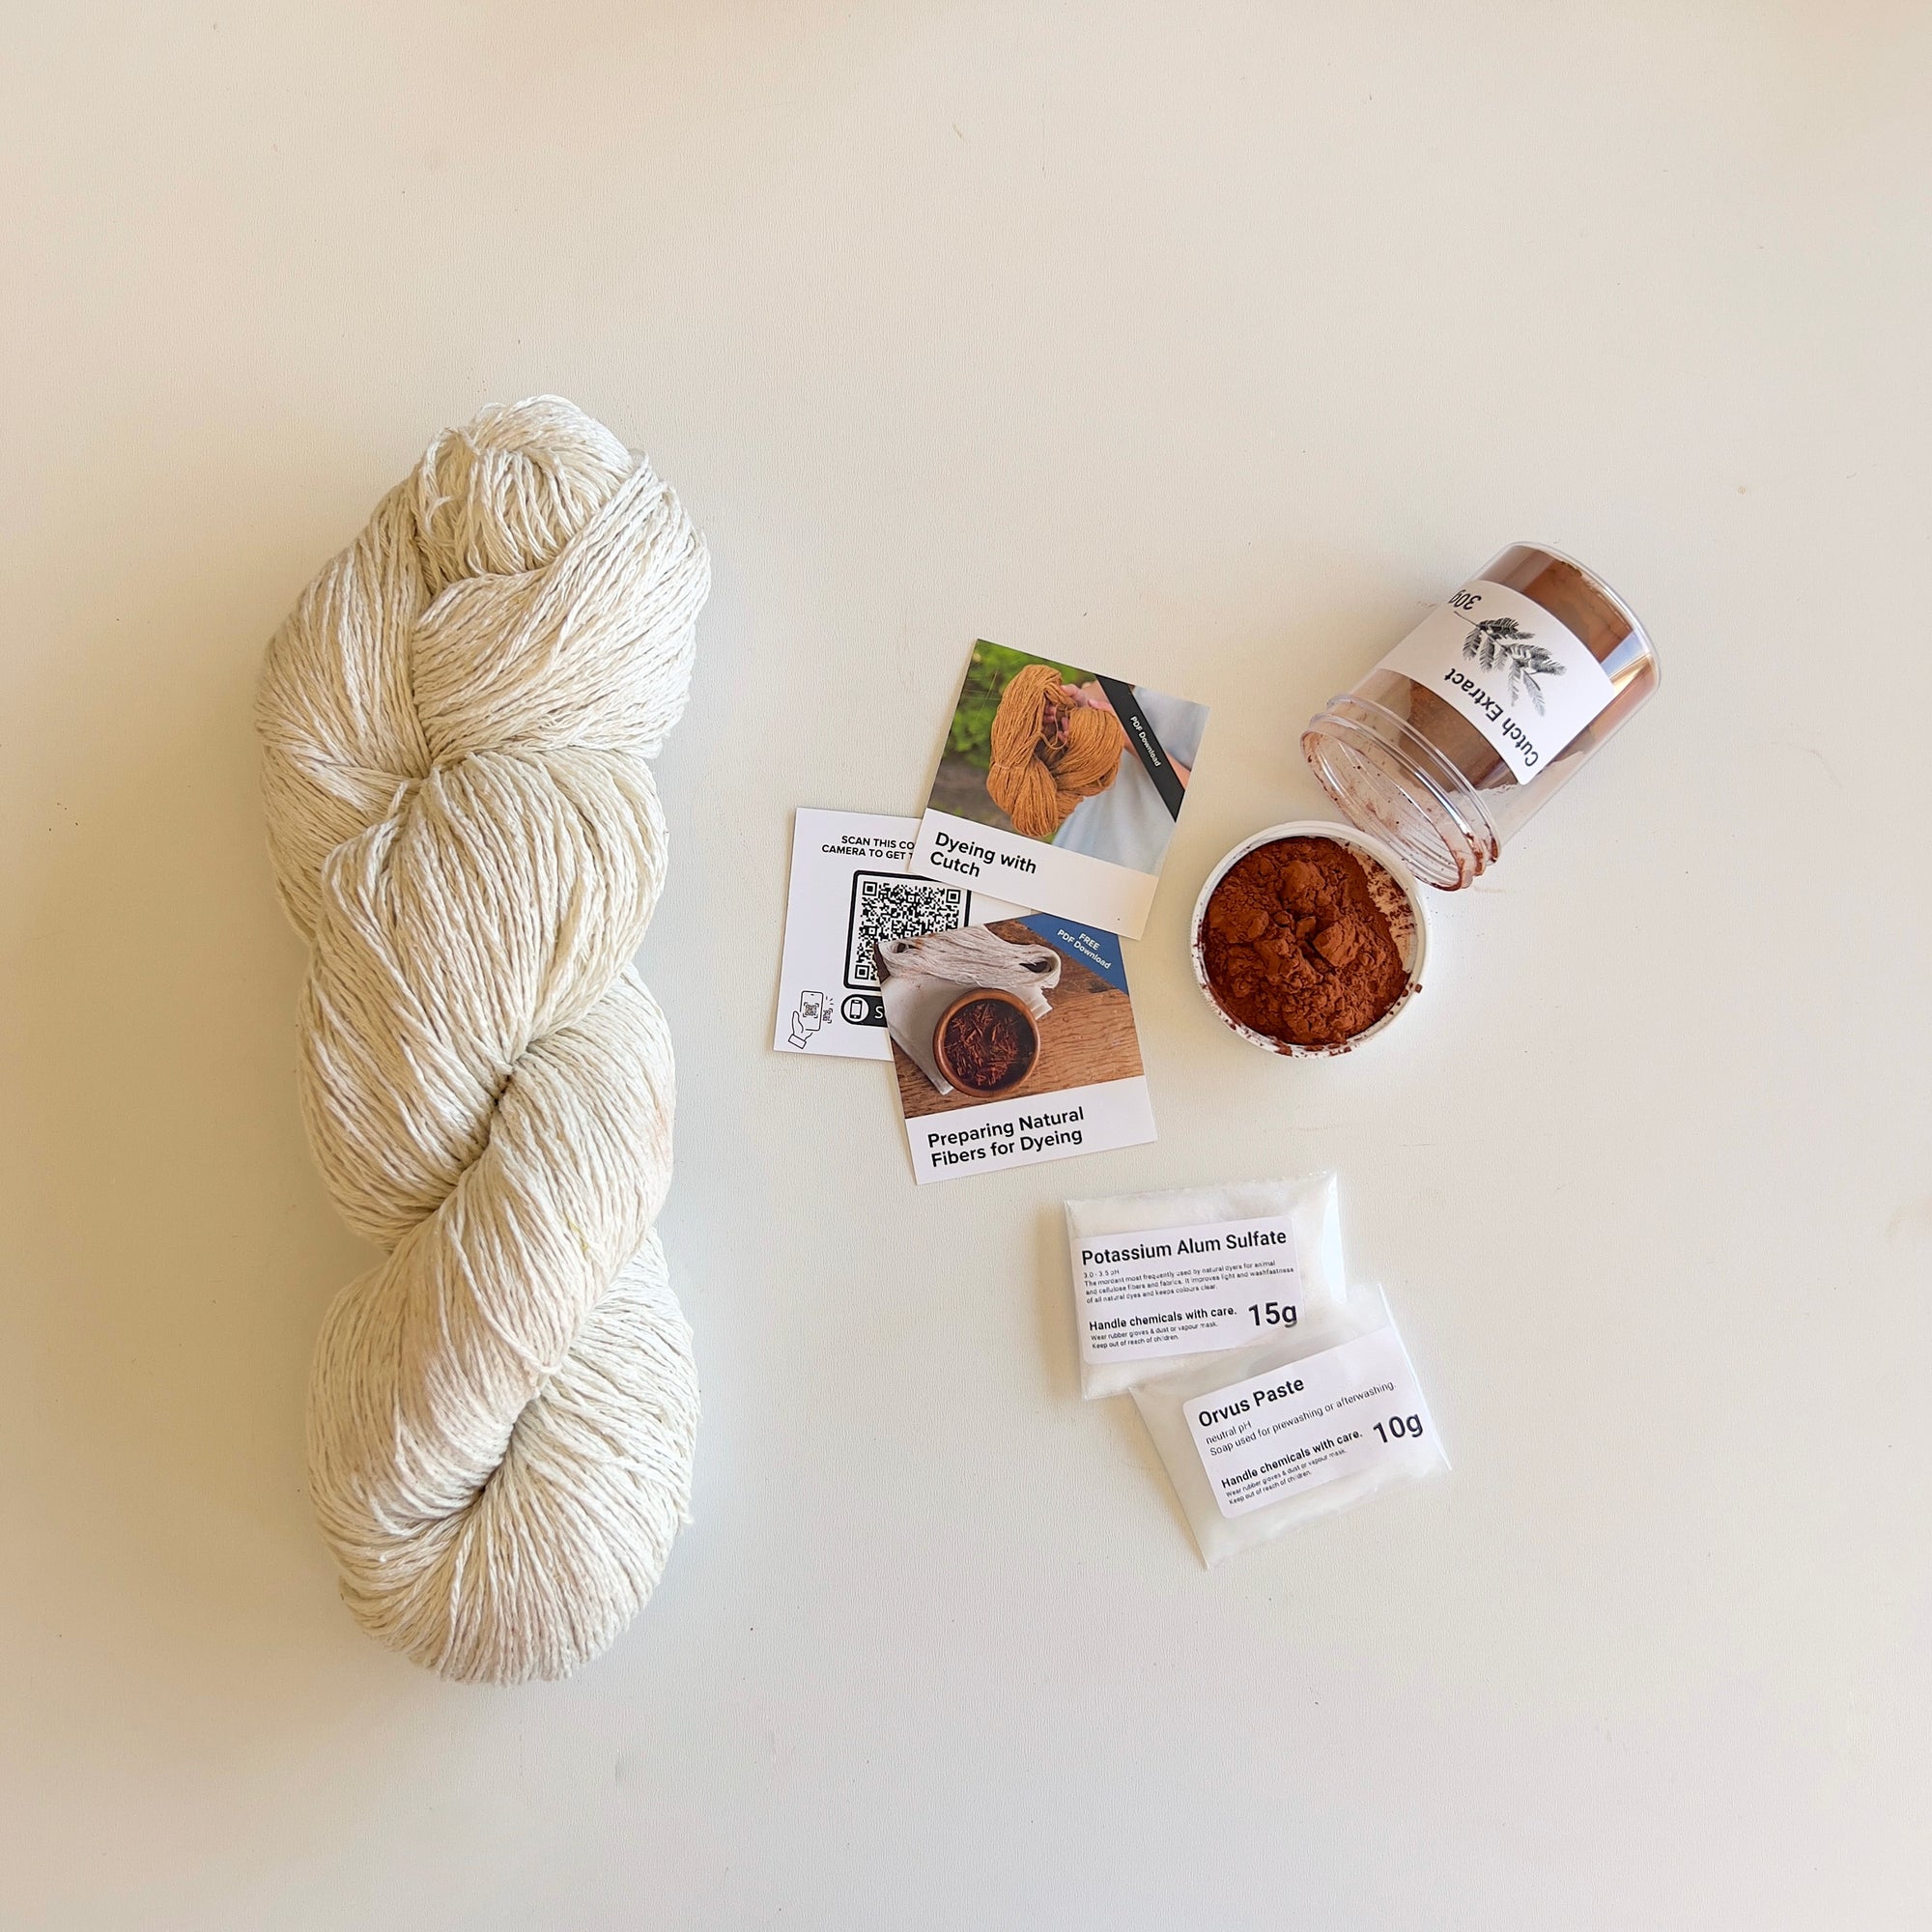 Natural Dyeing Silk Noil Kits - 3 Colours Available